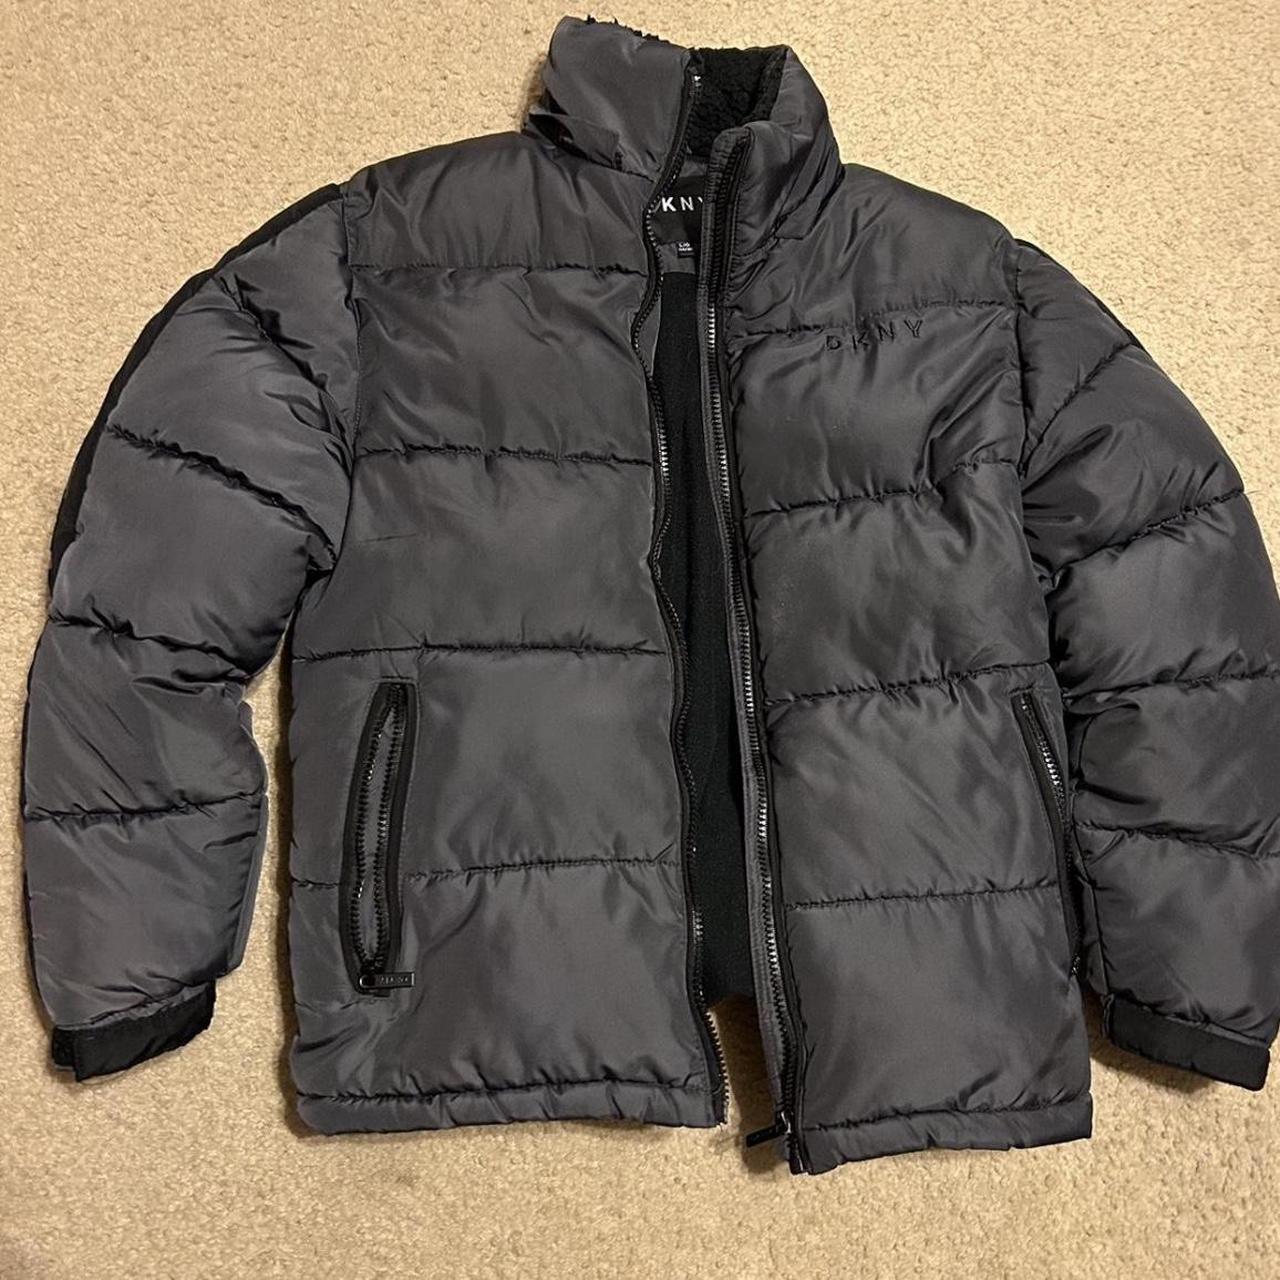 DKNY Puffer Jacket Fits similar to Northface Puffer - Depop